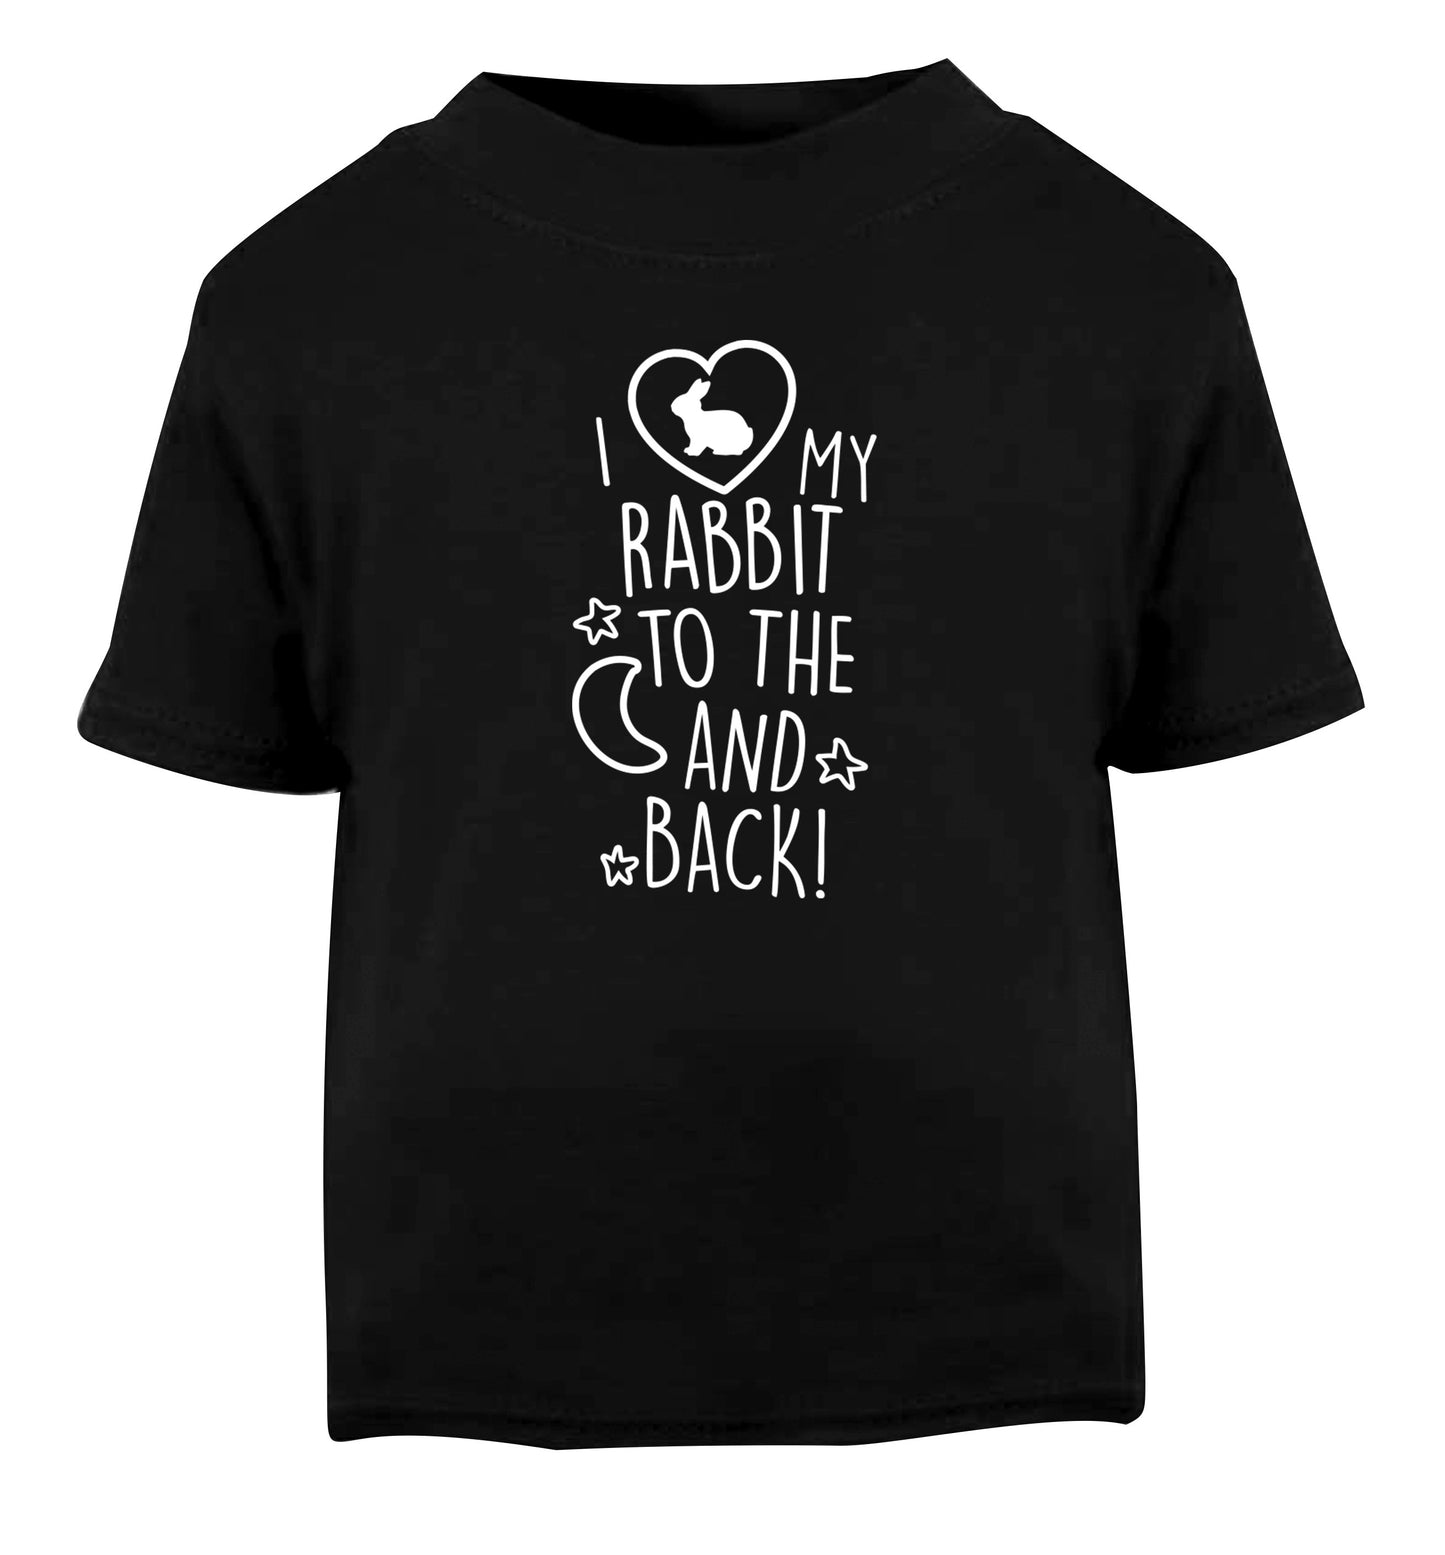 I love my rabbit to the moon and back Black Baby Toddler Tshirt 2 years